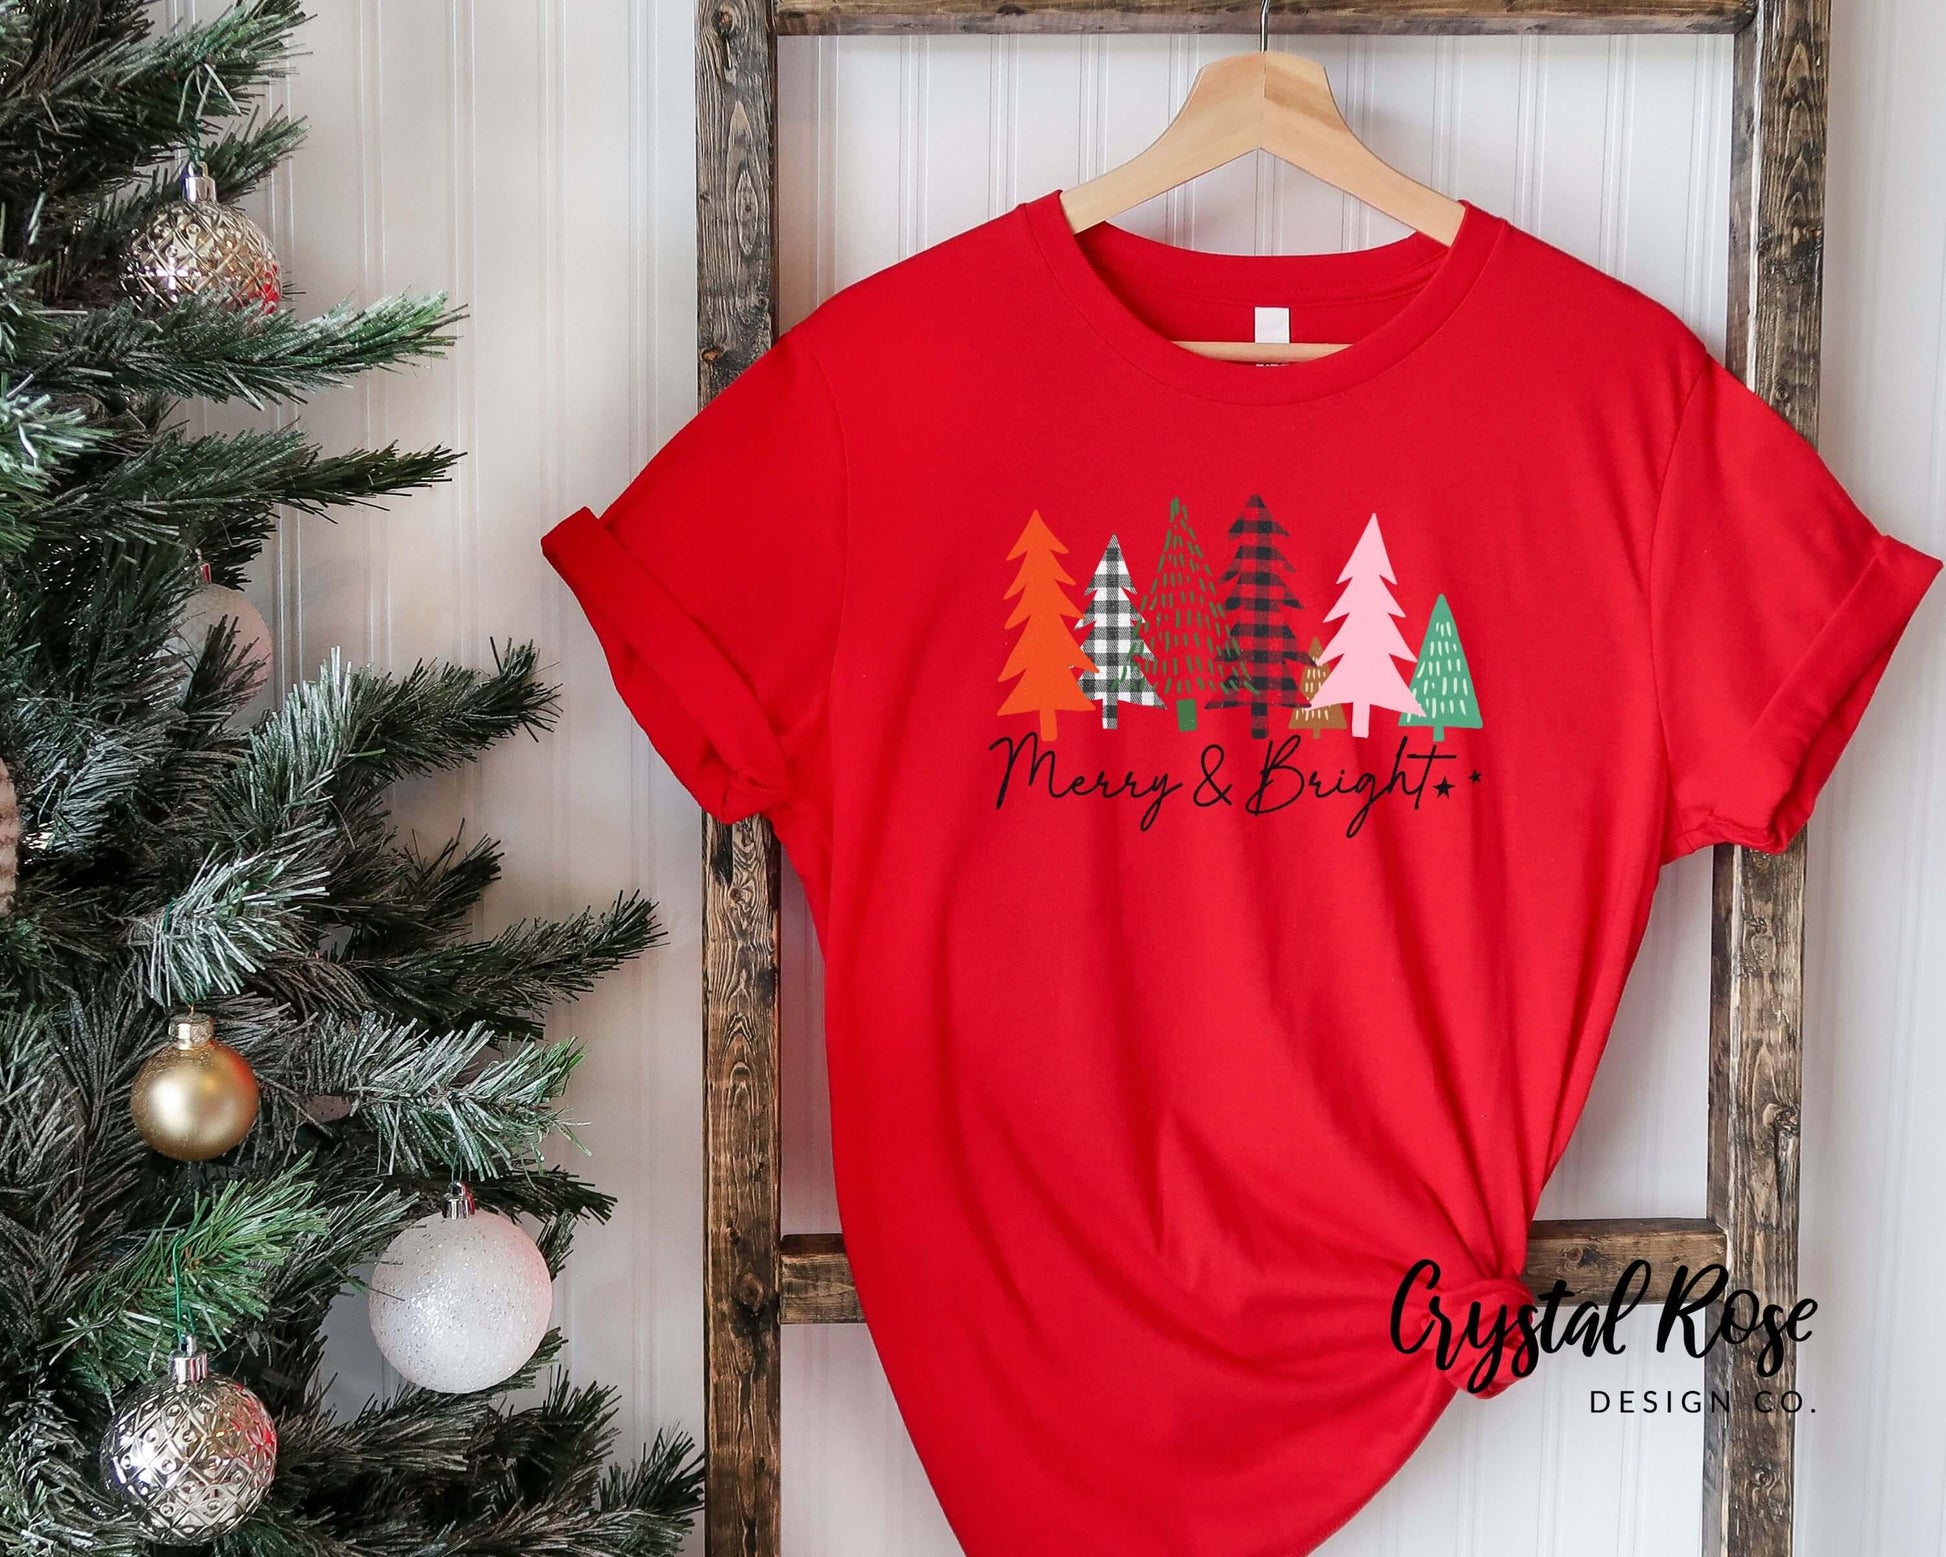 Merry and Bright Trees Christmas Shirt Short Sleeve Tee - Crystal Rose Design Co.